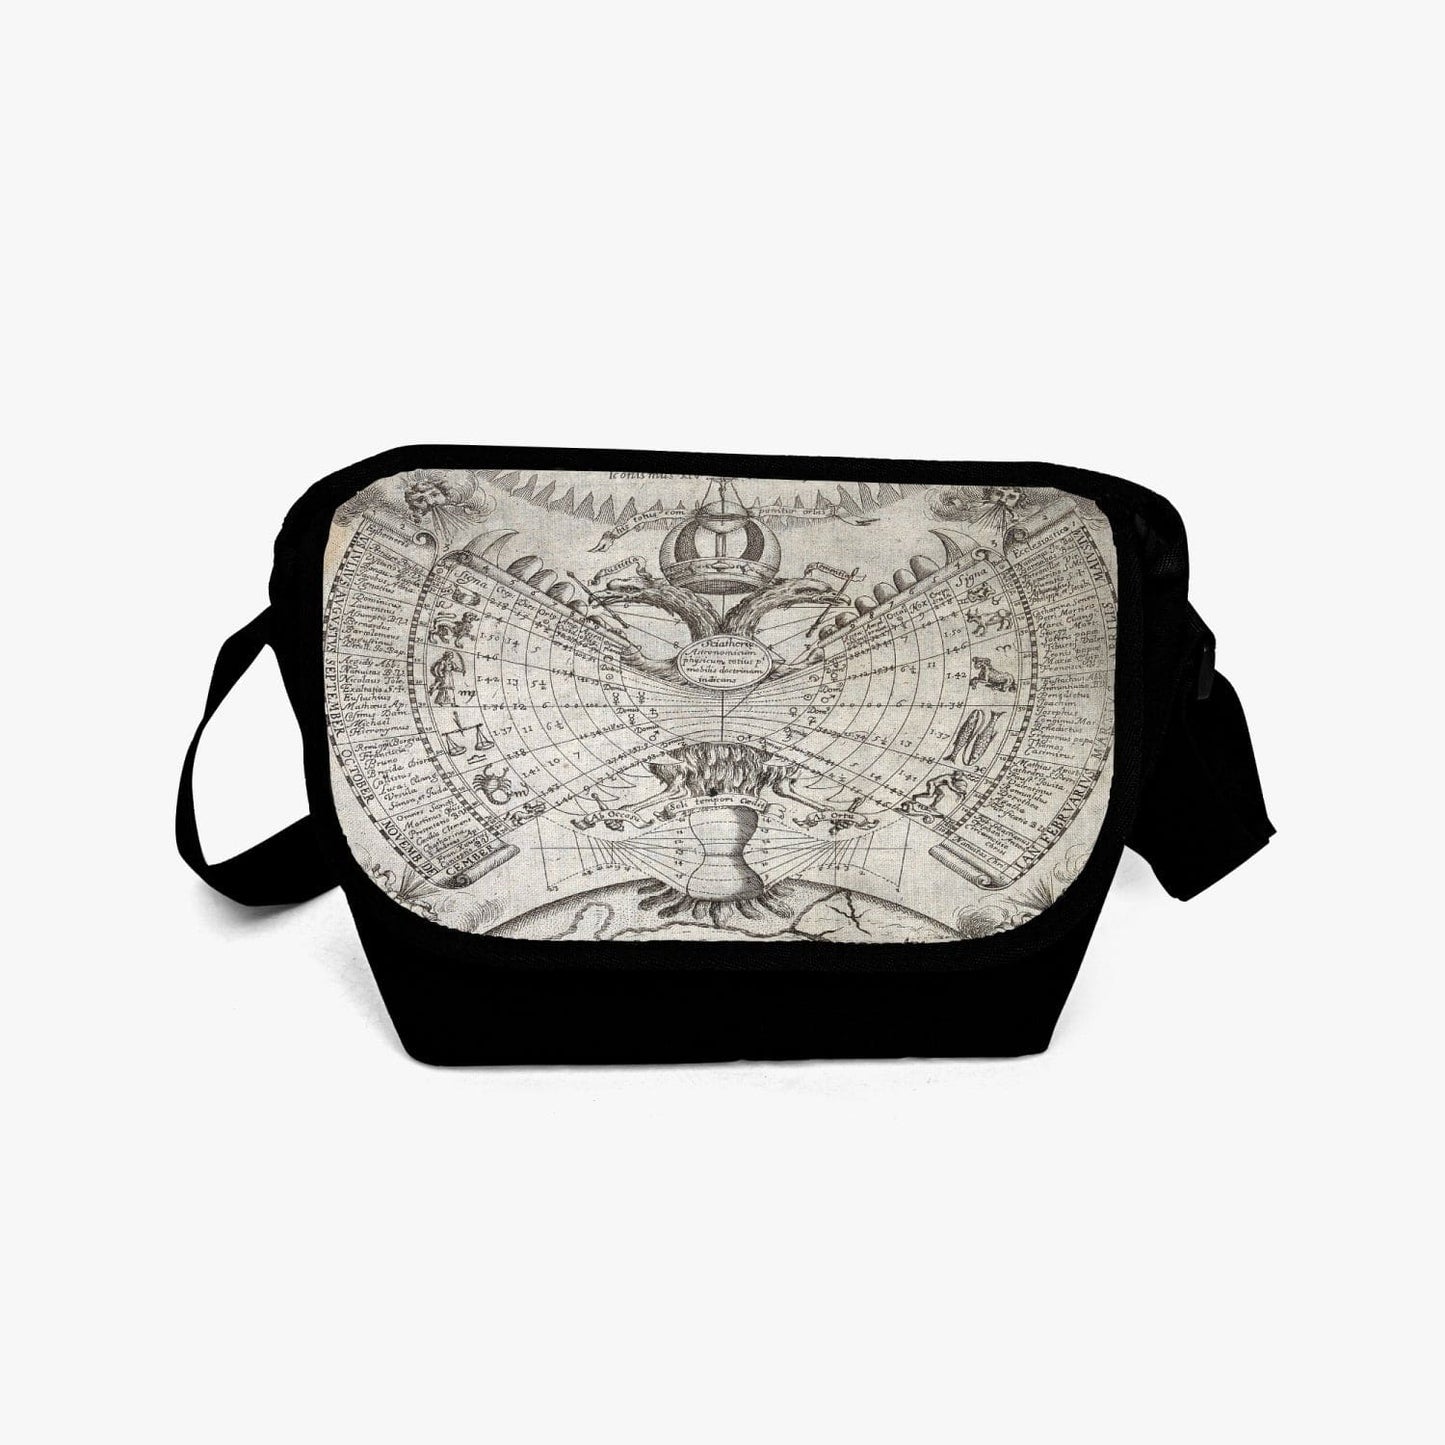 Engraving by P. Miotte dated 1646 is the source of the print on this practical, unisex Messenger bag at Gallery Serpentine